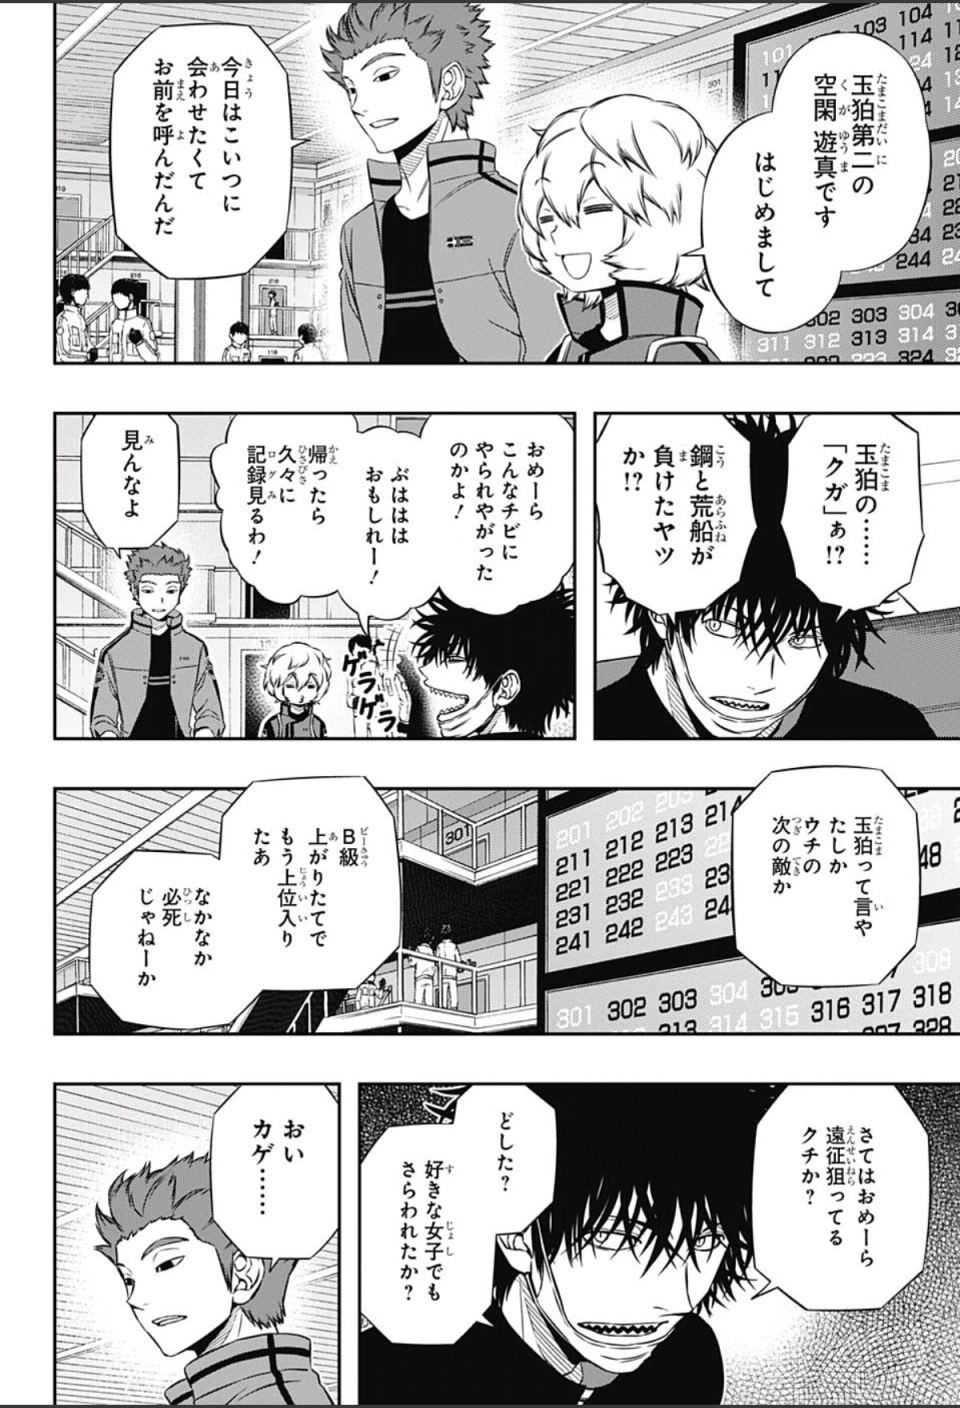 World Trigger - Chapter 109 - Page 4